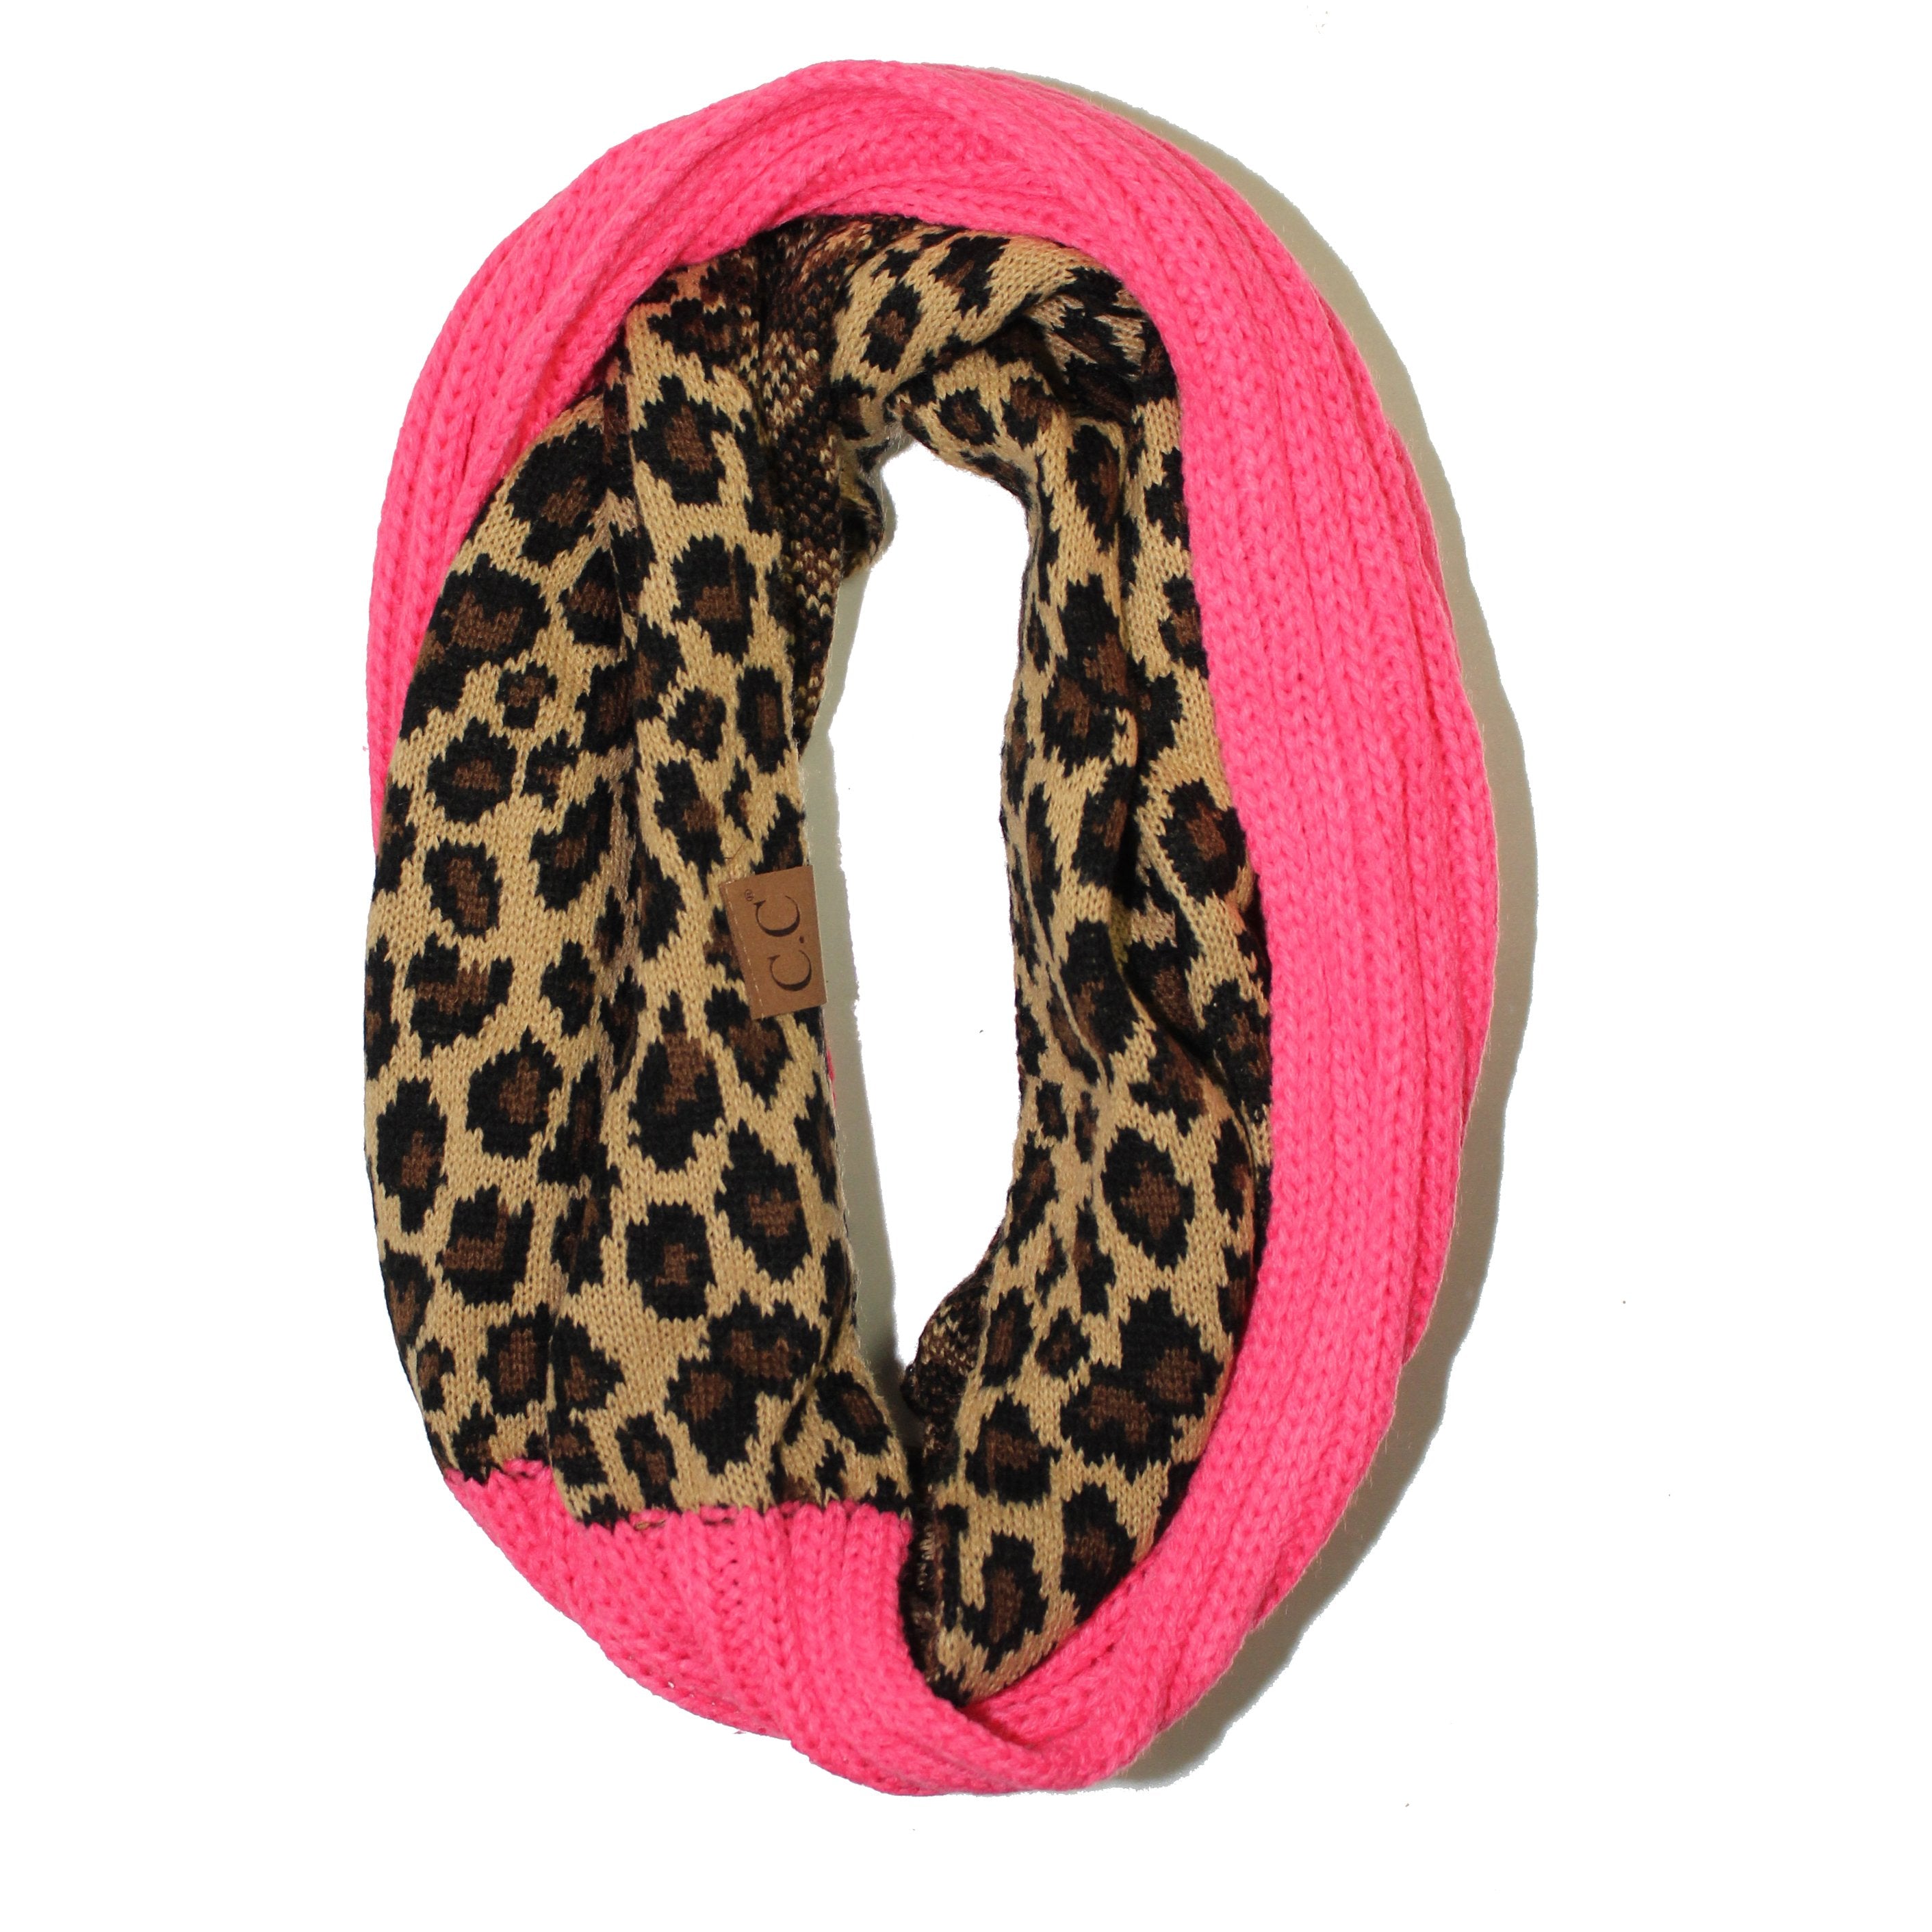 SF-45 New Candy Pink Leopard Scarf